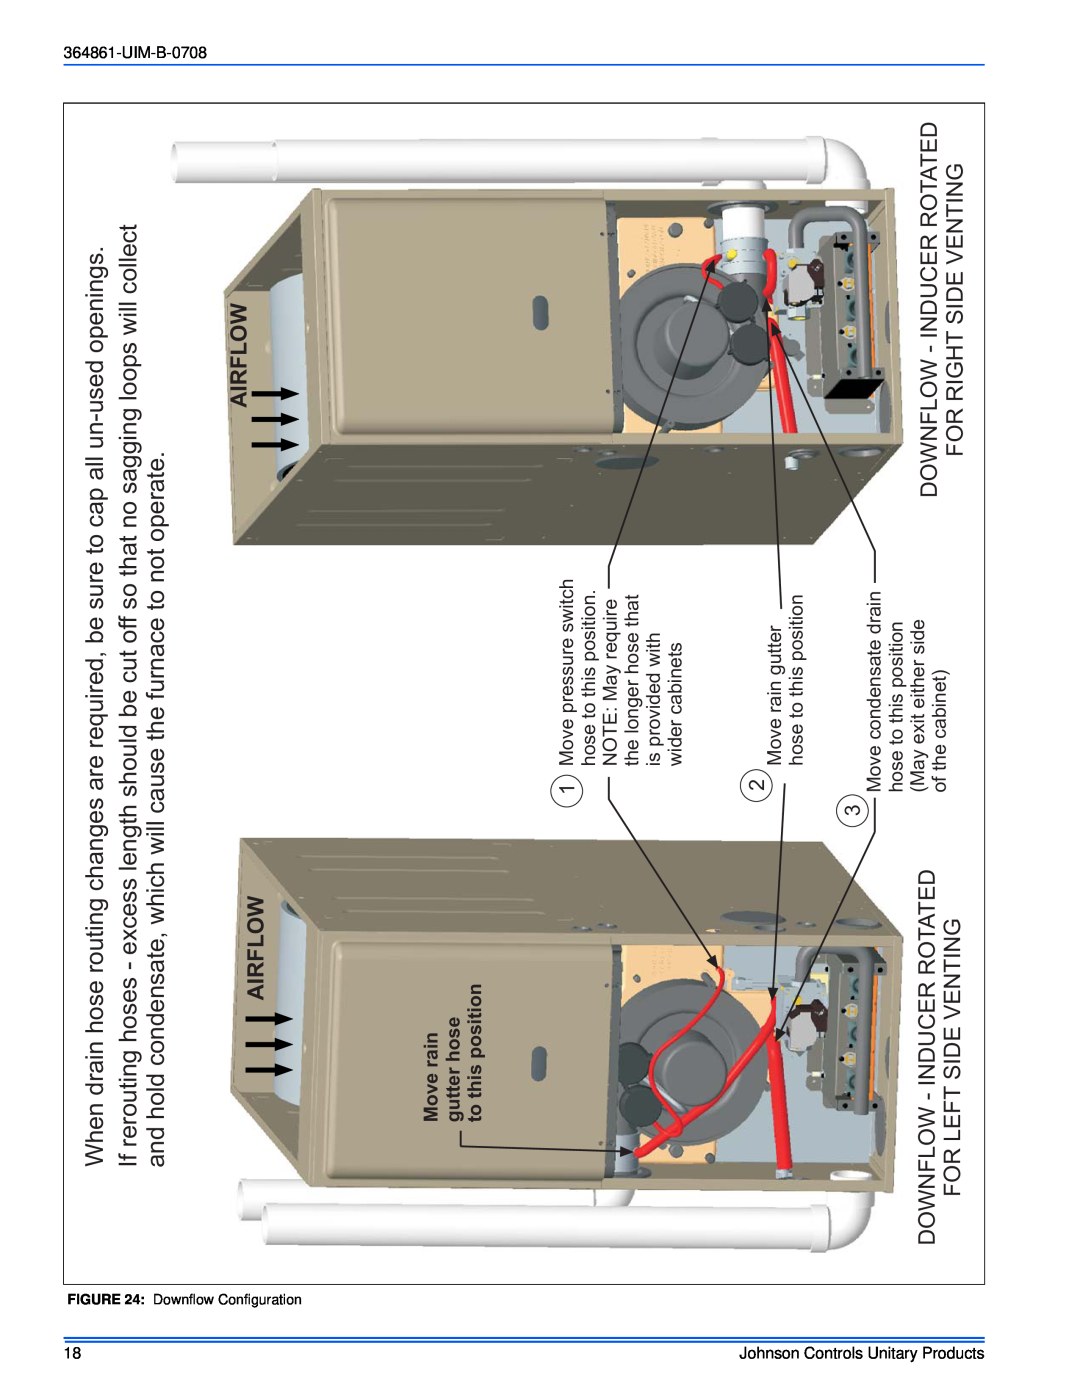 Johnson Controls TG9S*MP, GG9S*MP installation manual Airflow Airflow, Downflow - Inducer Rotated For Left Side Venting 